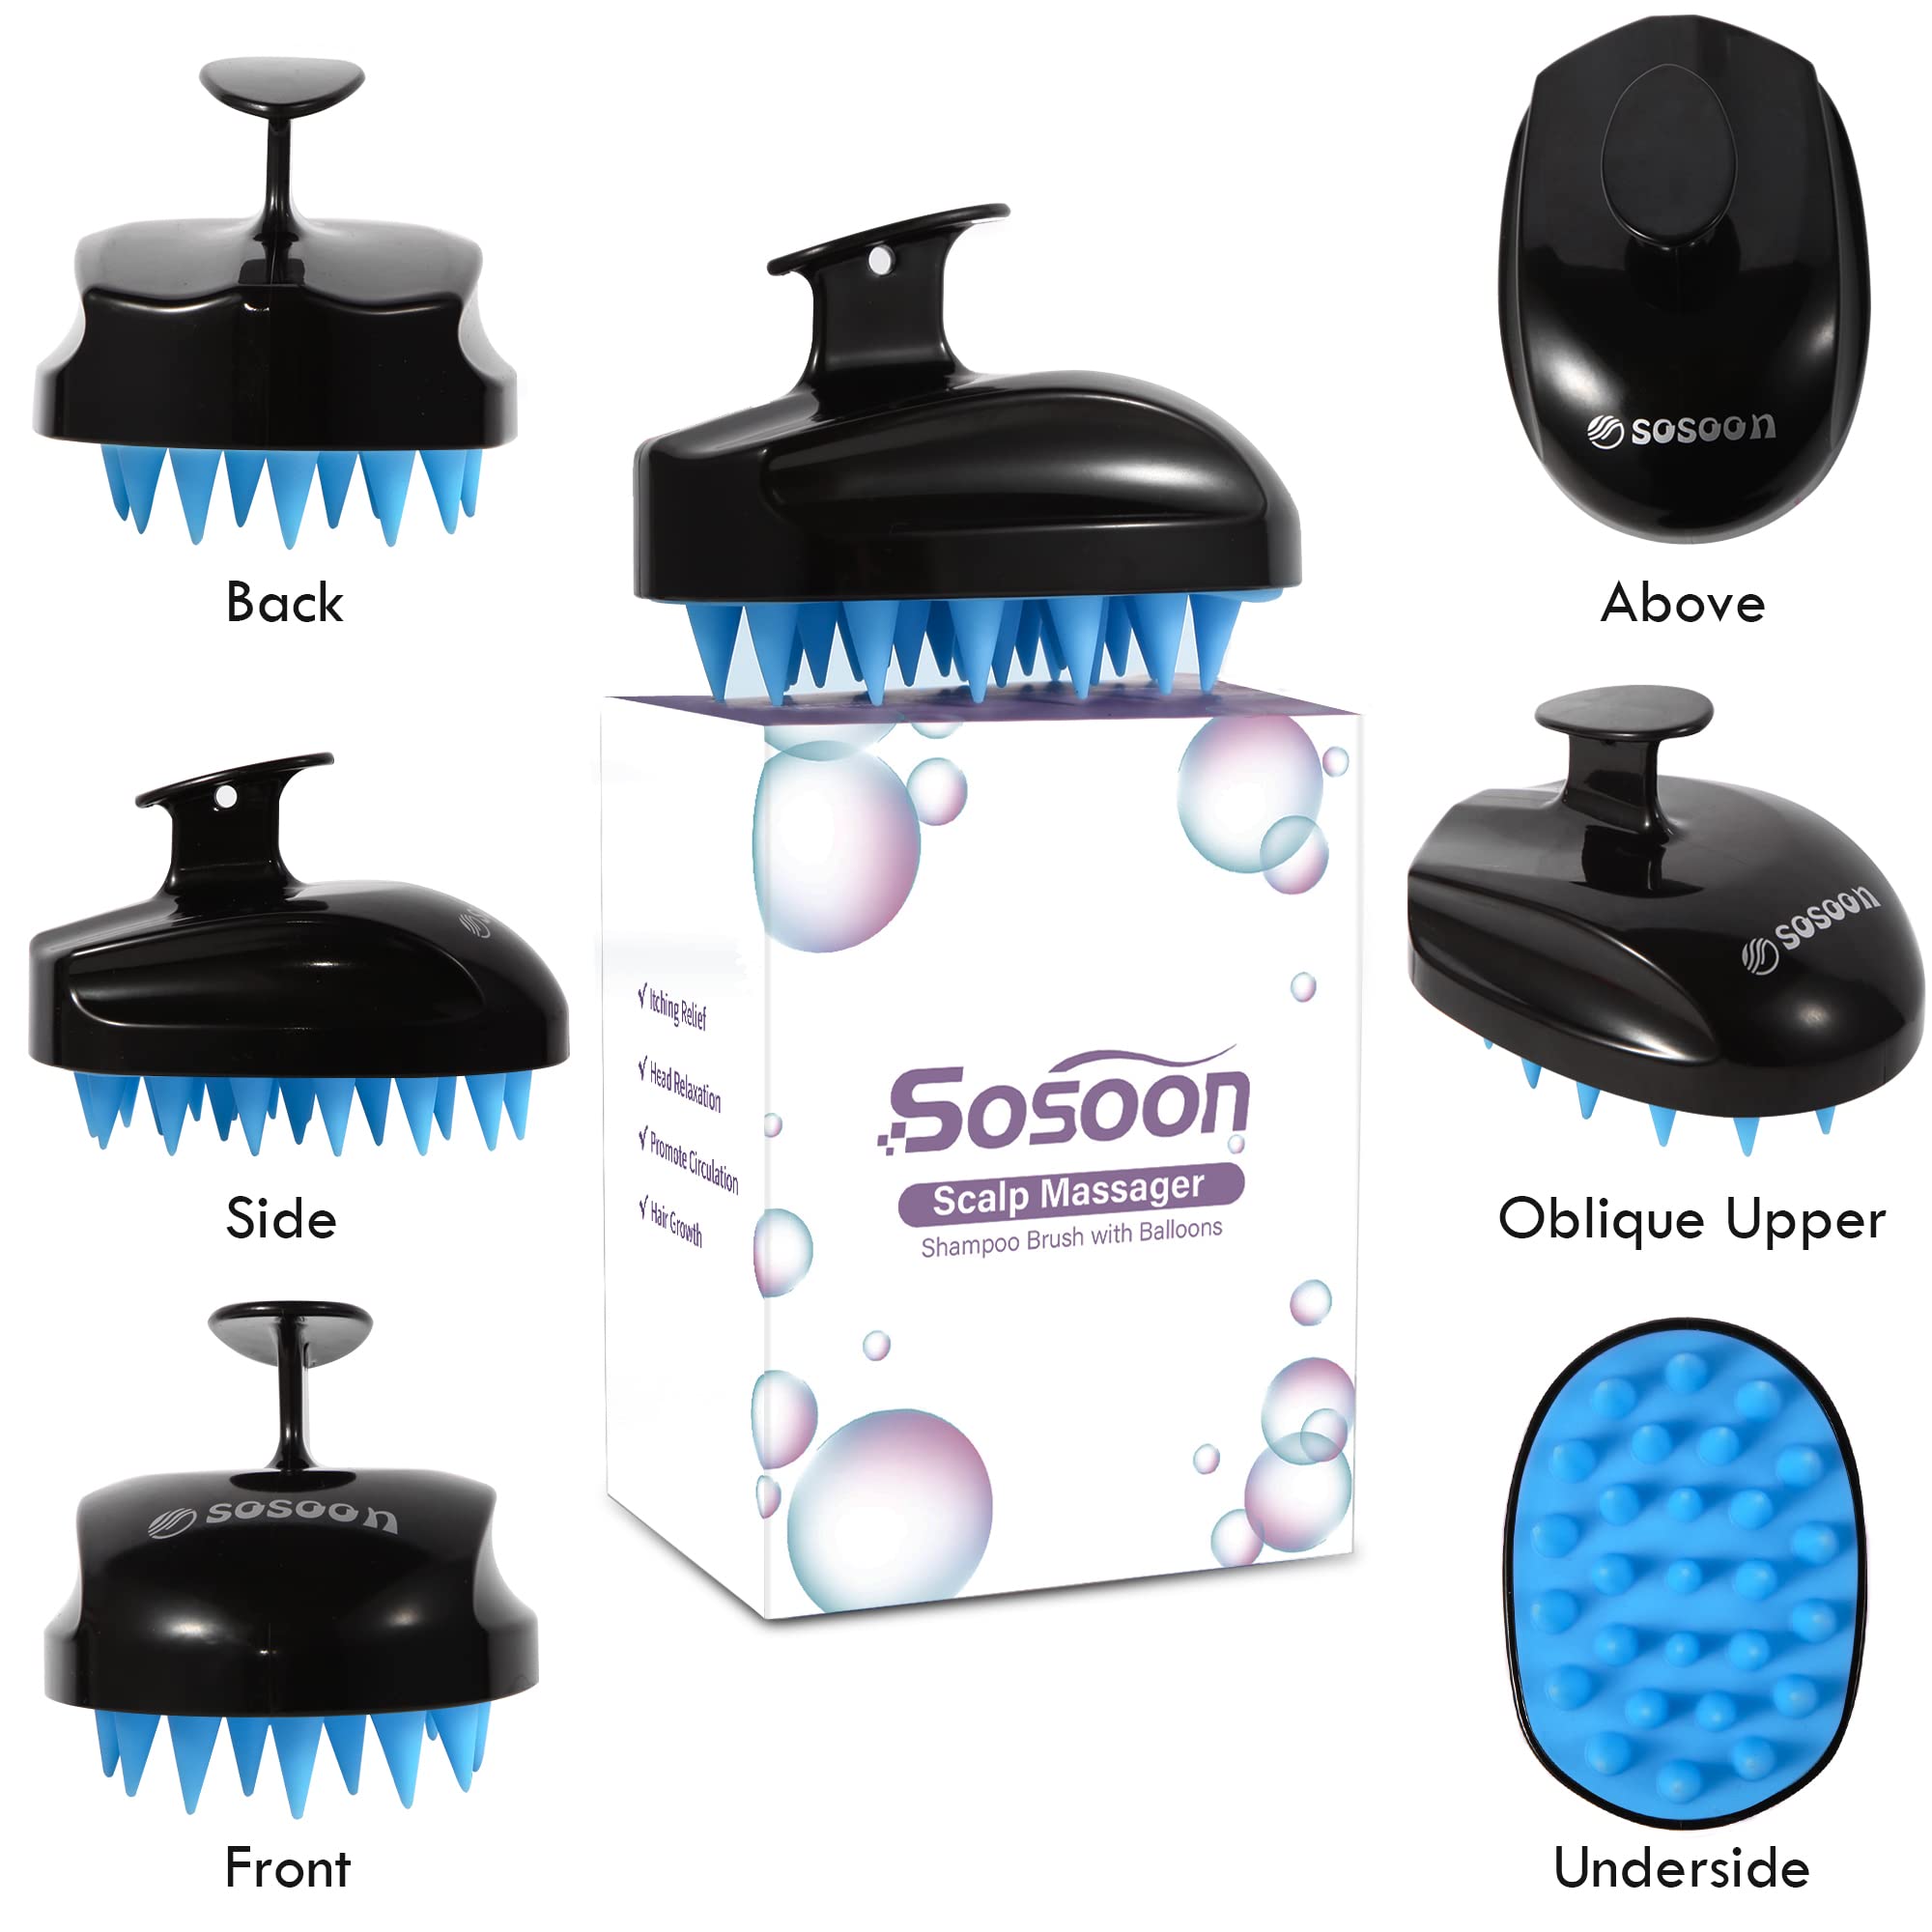 Sosoon Scalp Massager Shampoo Brush, Soft Silicone Hair Scalp Exfoliating Scrubber for Men Women Kids Hair Growth Stress Relief with 50pcs Balloons(Black and Dark Blue)